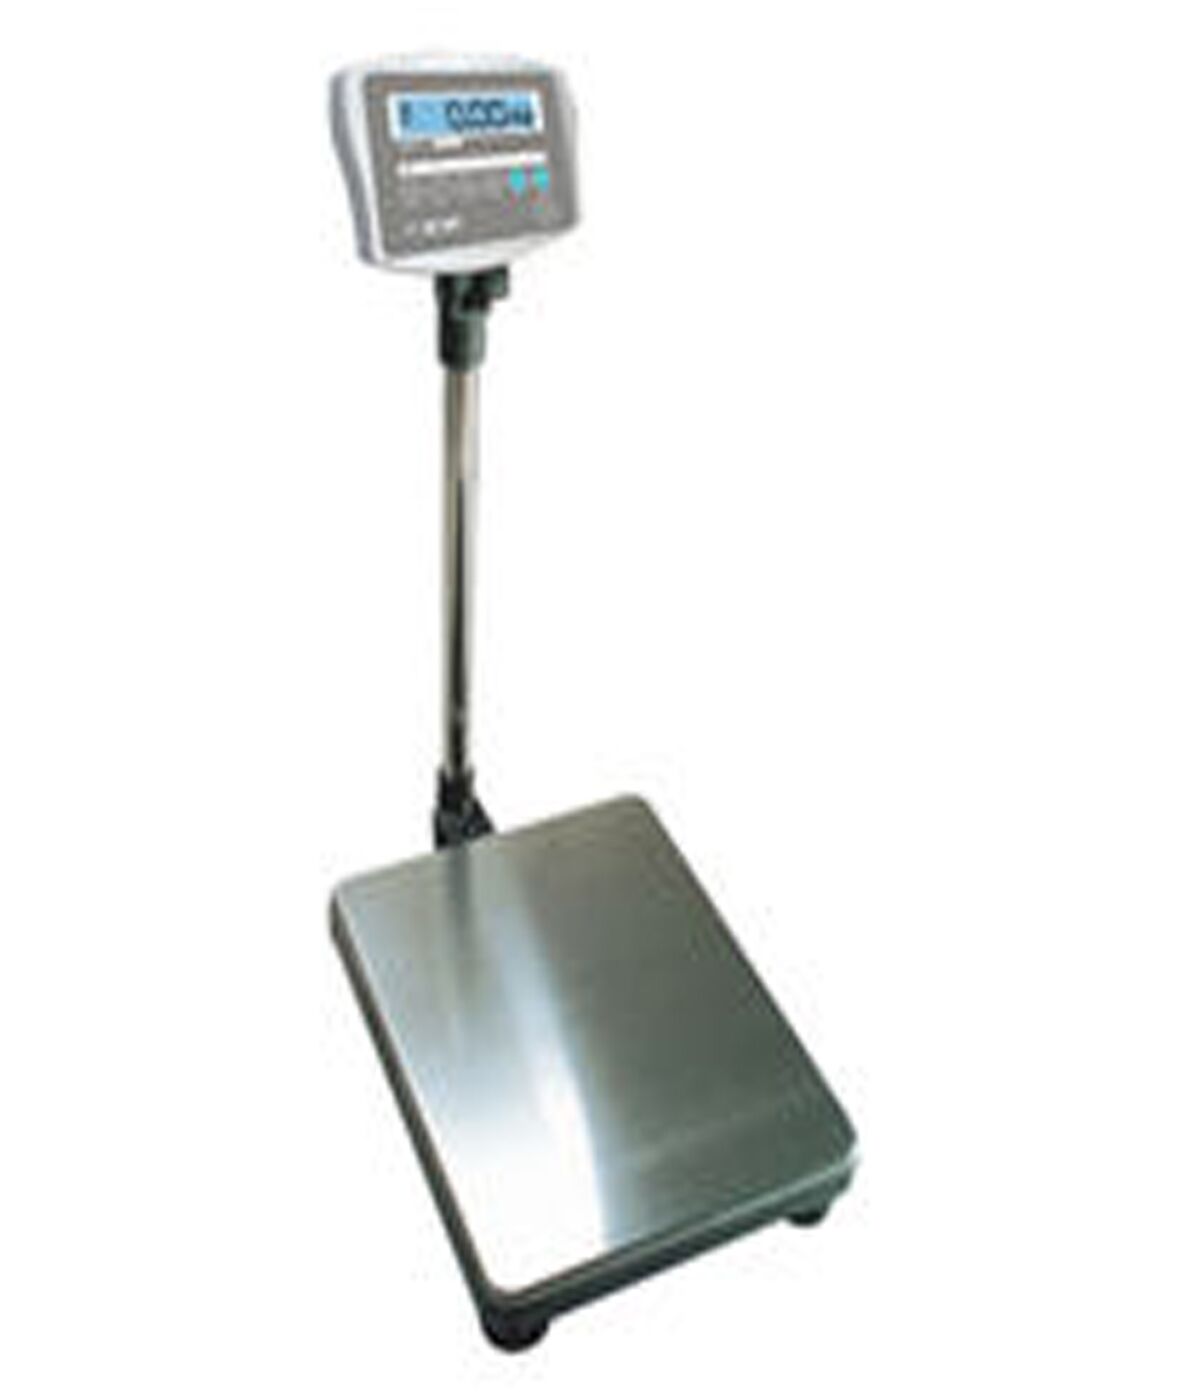 WEIGHING SCALE - ELECTRONIC CITIZEN BRAND SCALE